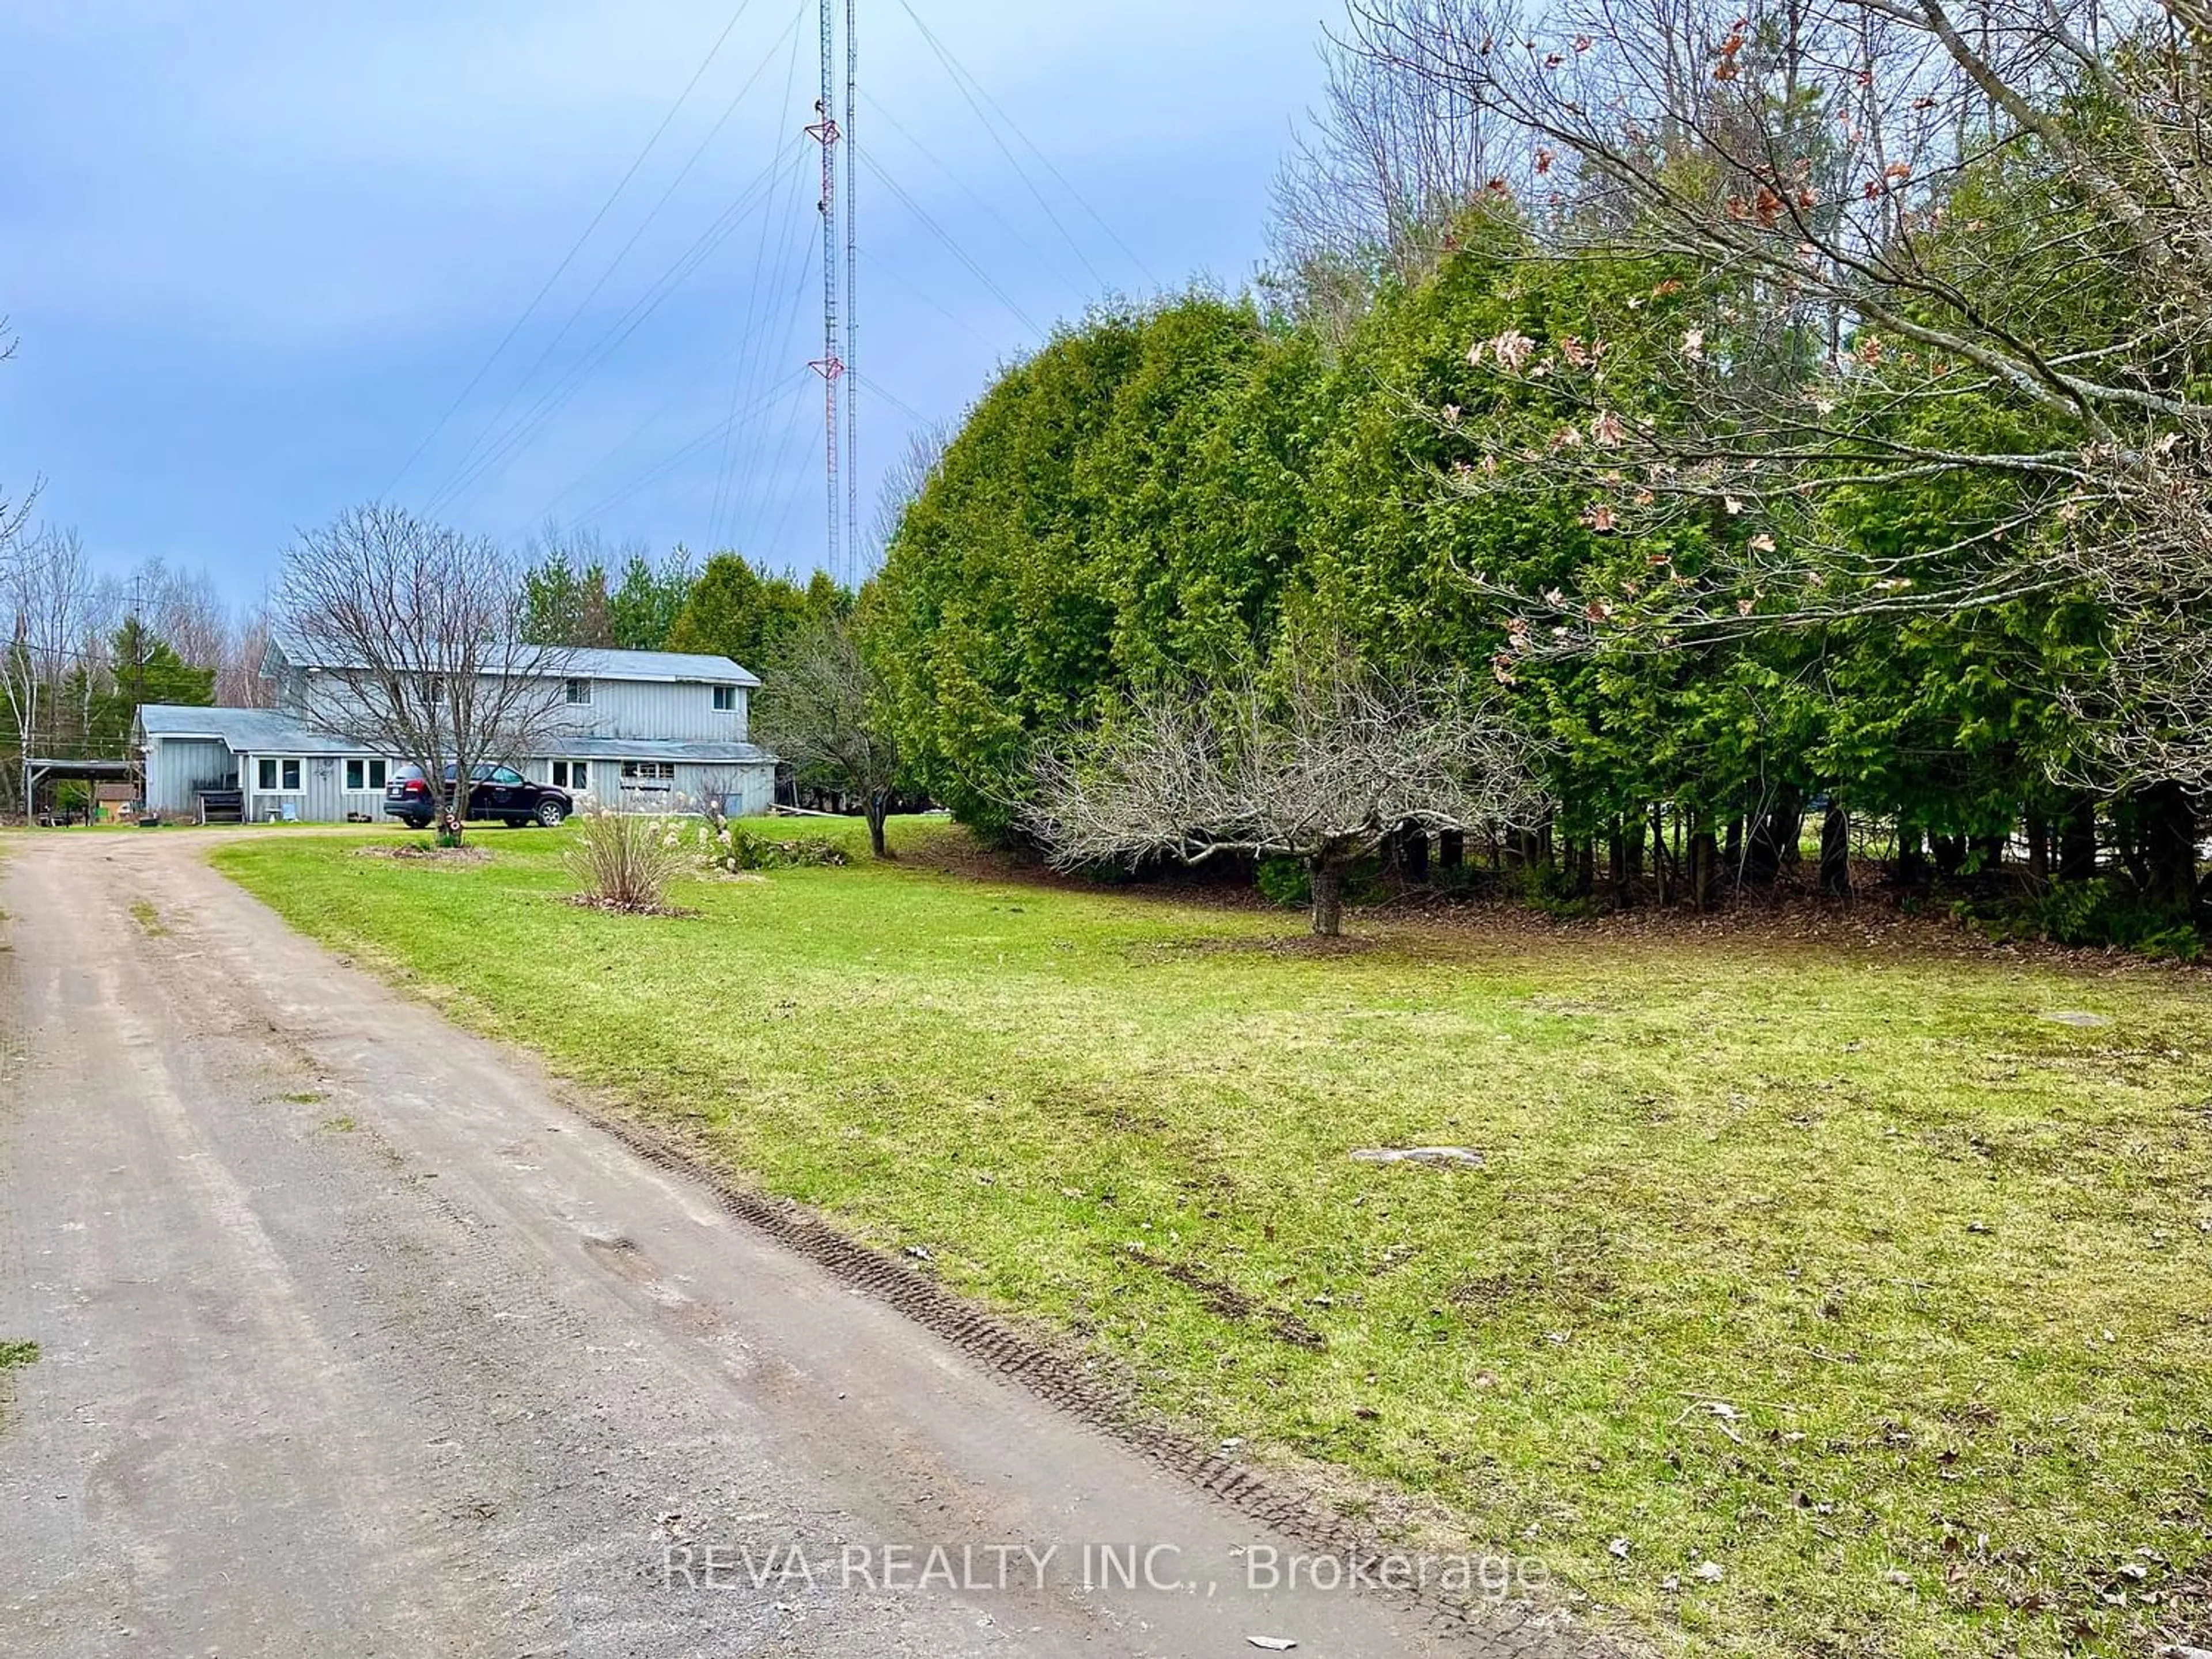 Street view for 1073 Airport Rd, Faraday Ontario K0L 1C0